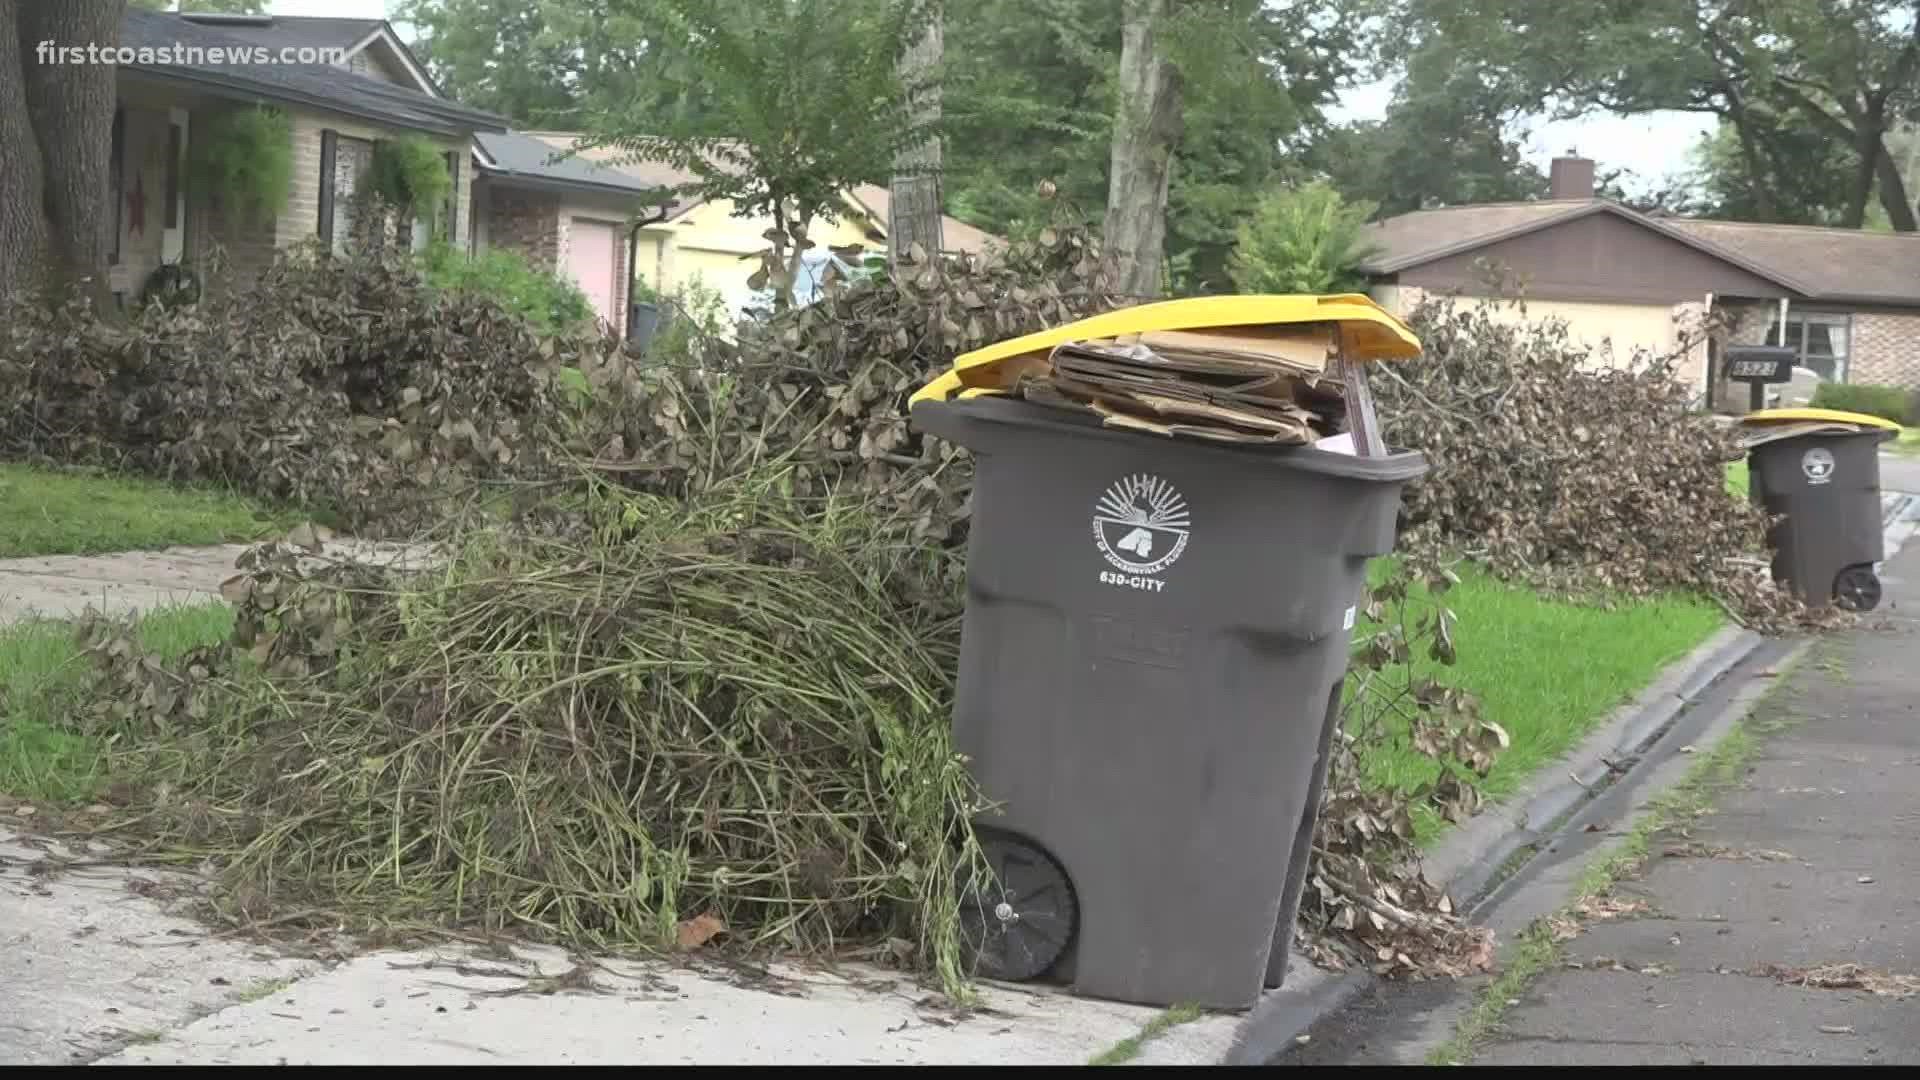 Residents report that yard waste may not be picked up for more than a month.